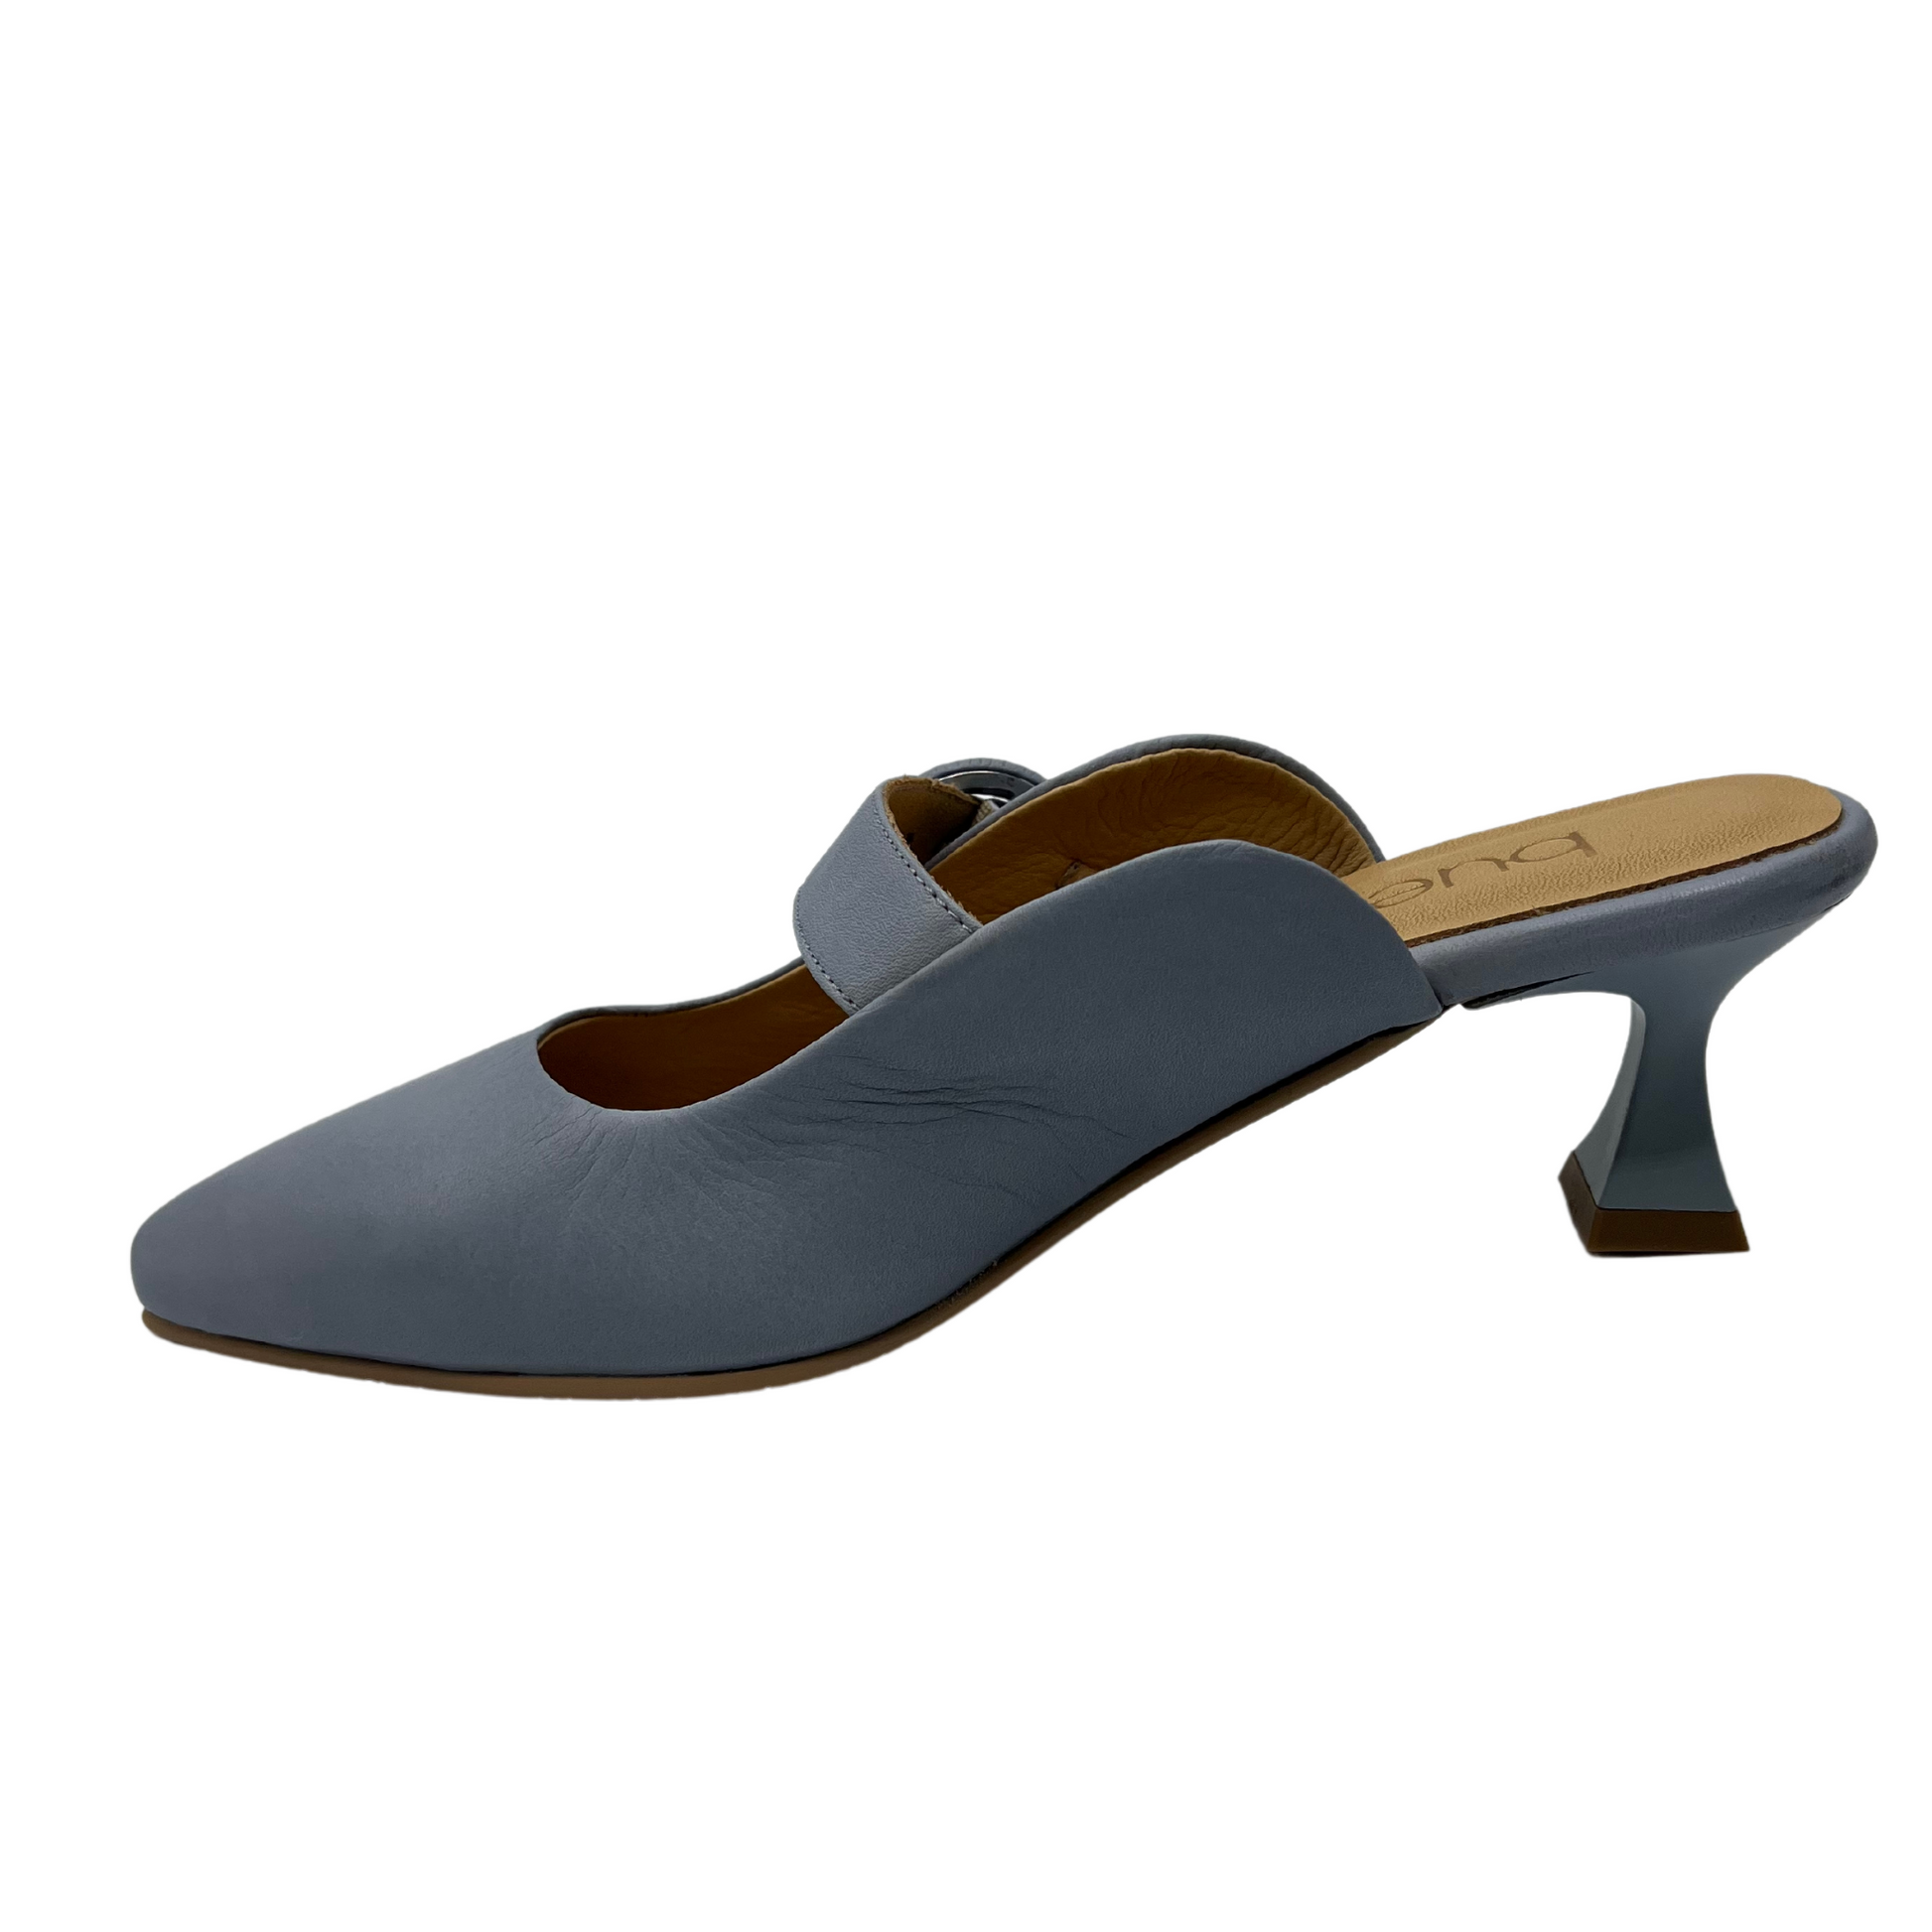 Left facing view of powder blue leather slip-on mary jane with flared heel